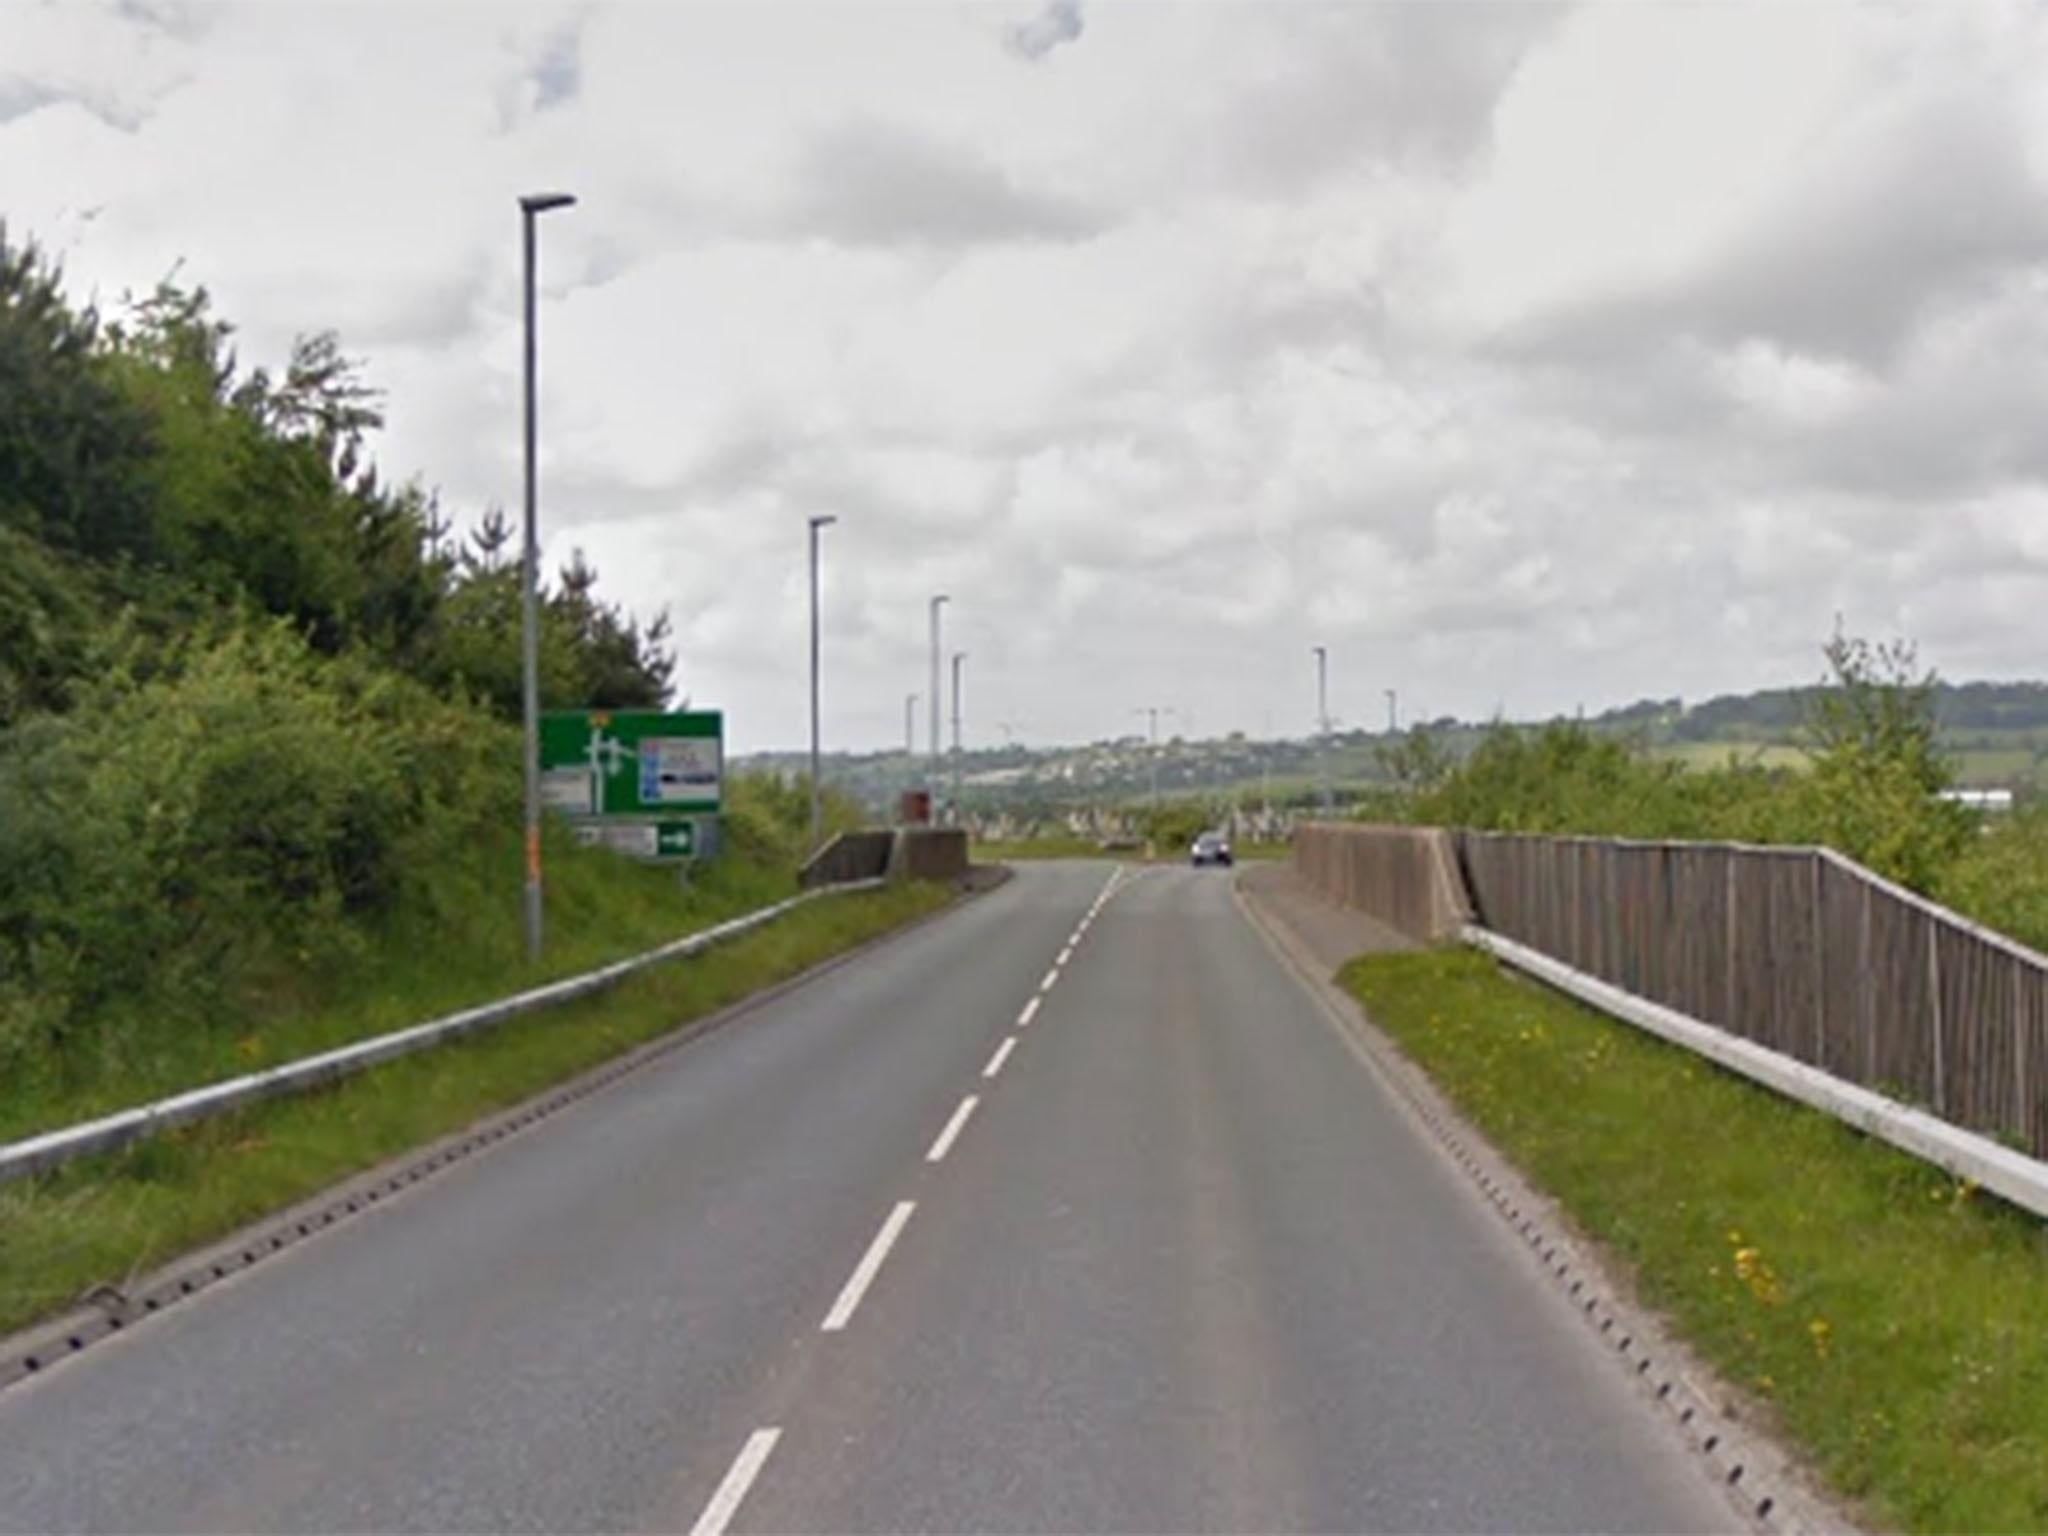 The vehicle collided with a Marks and Spencers lorry on the A361 near Barnstaple